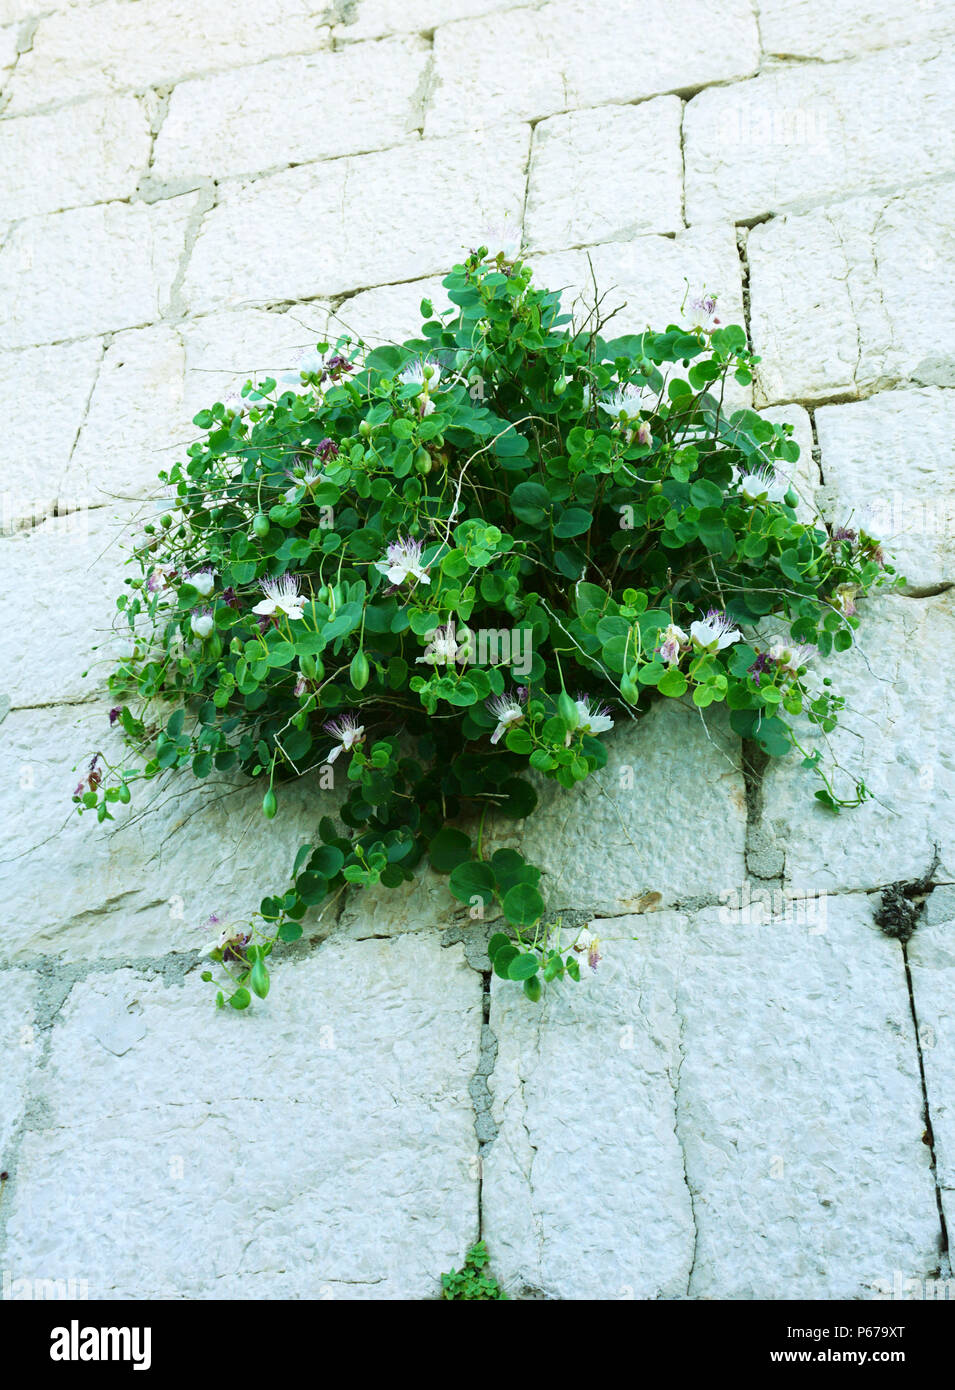 Capparis spinosa, capers, mediterranean shrub that grows on the stone bricks wall Stock Photo